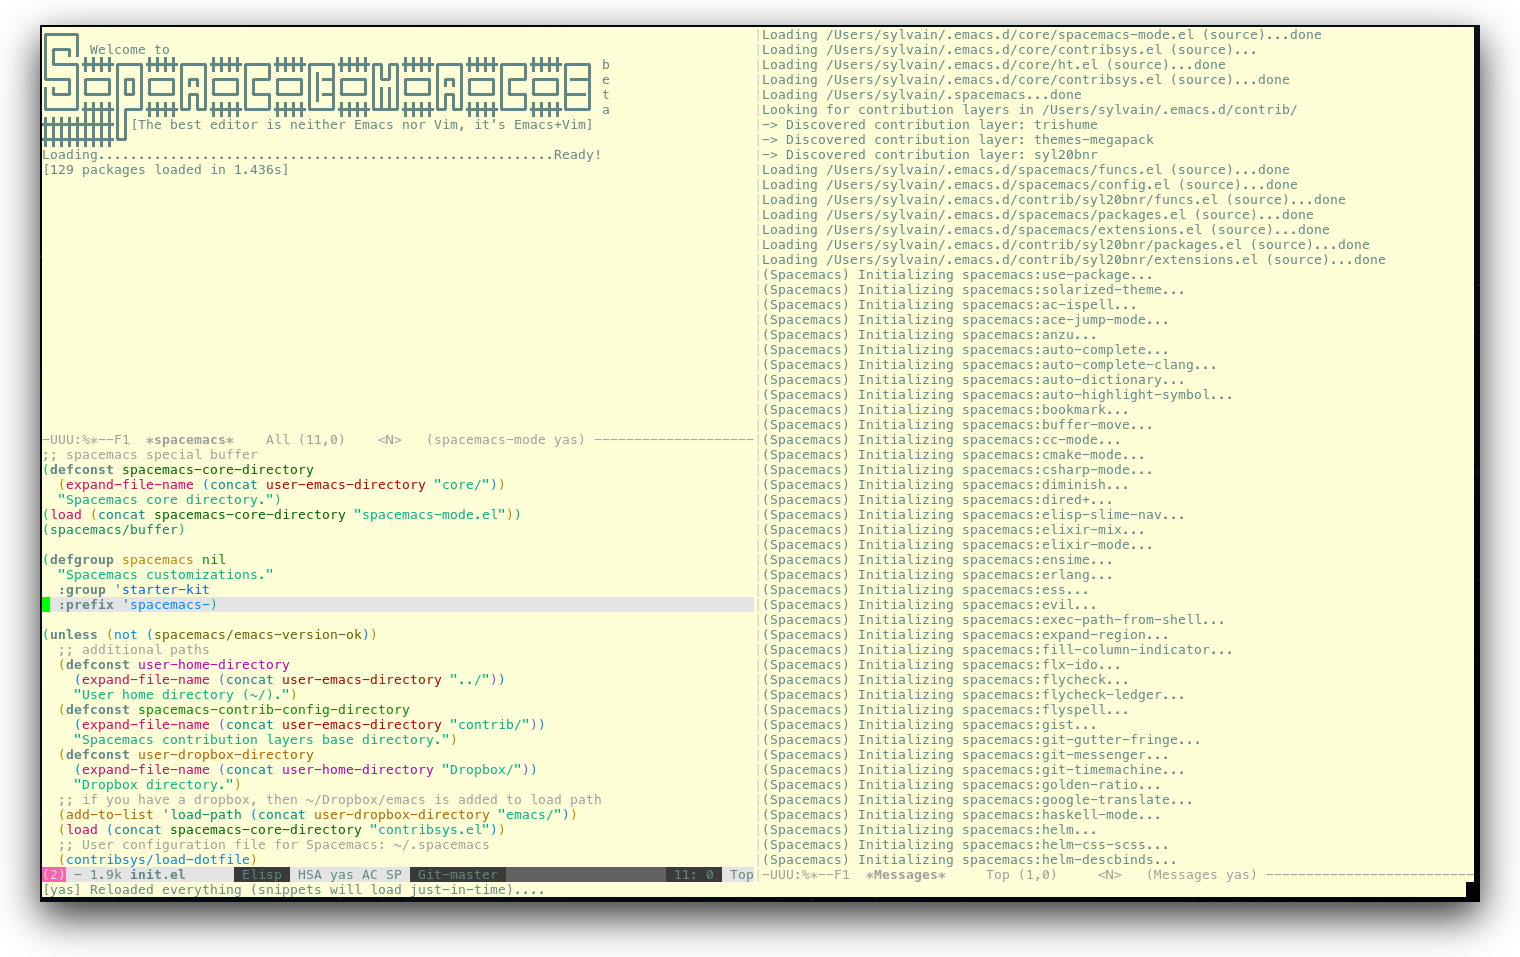 /TakeV/spacemacs/media/commit/be817362aeb84983349ff72ca78ab90a34cc5e6e/doc/img/spacemacs-urxvt.png